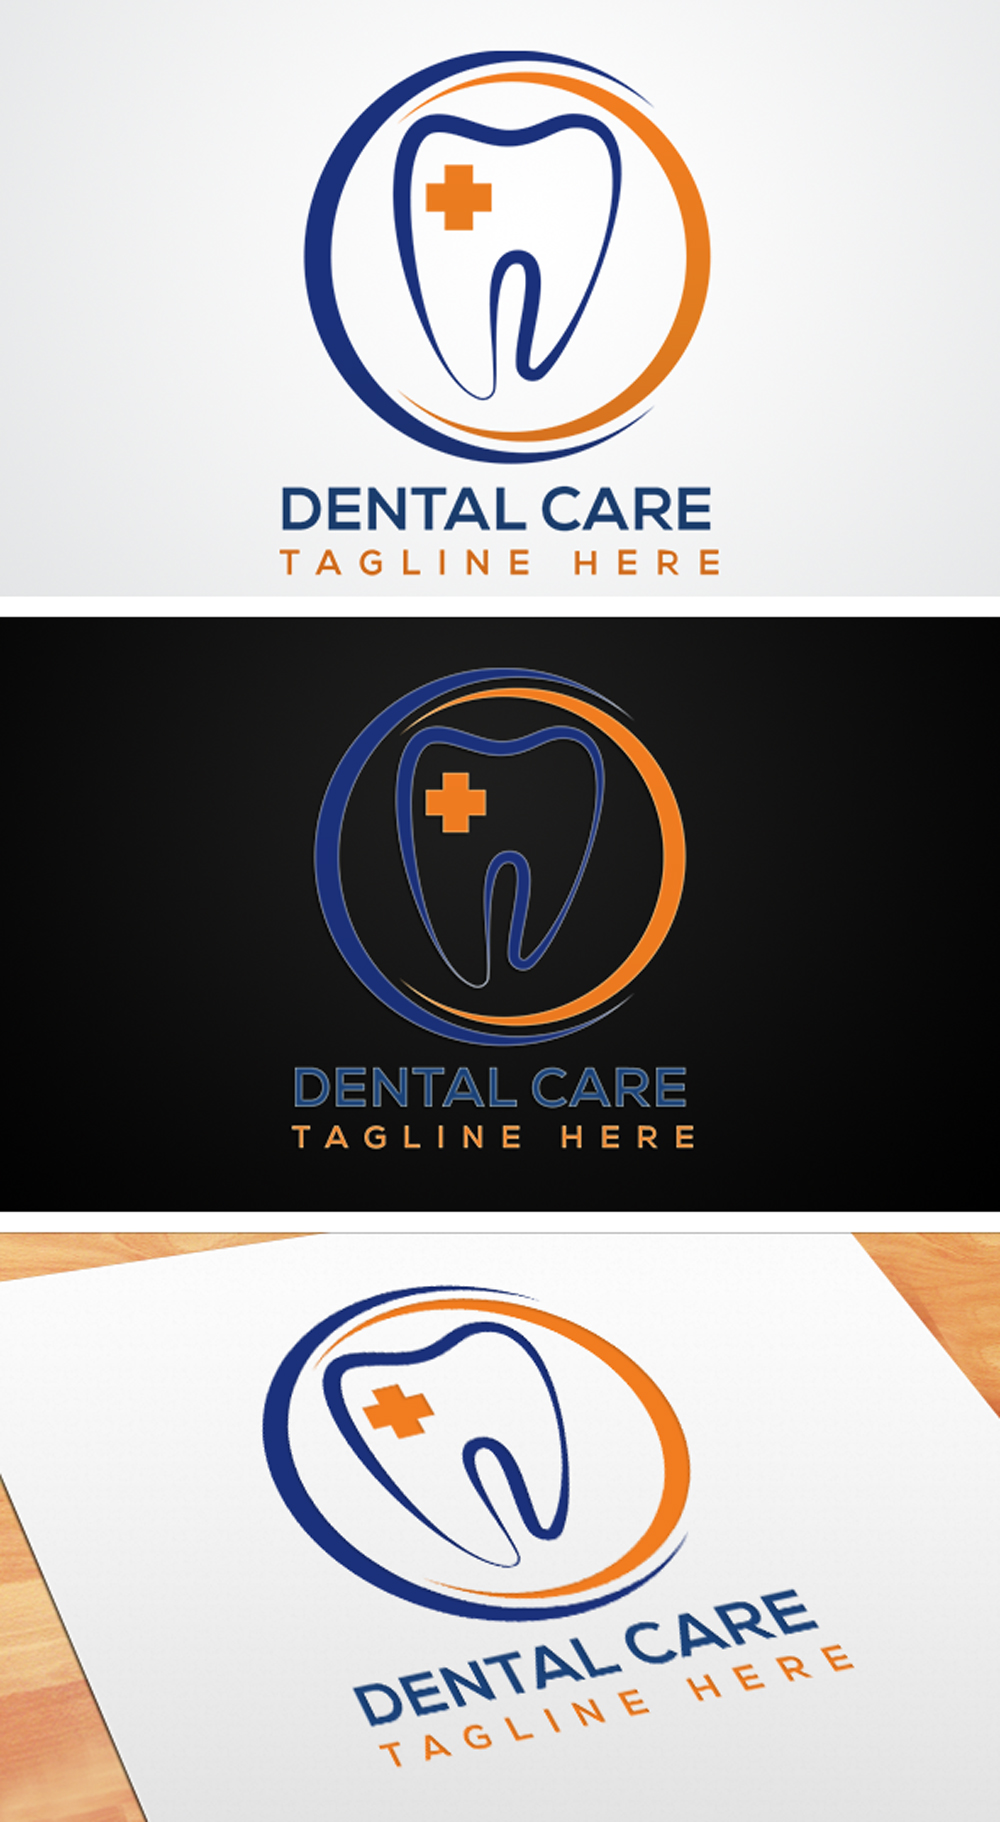 Image Compilation of Irresistible Tooth Shape Logos.